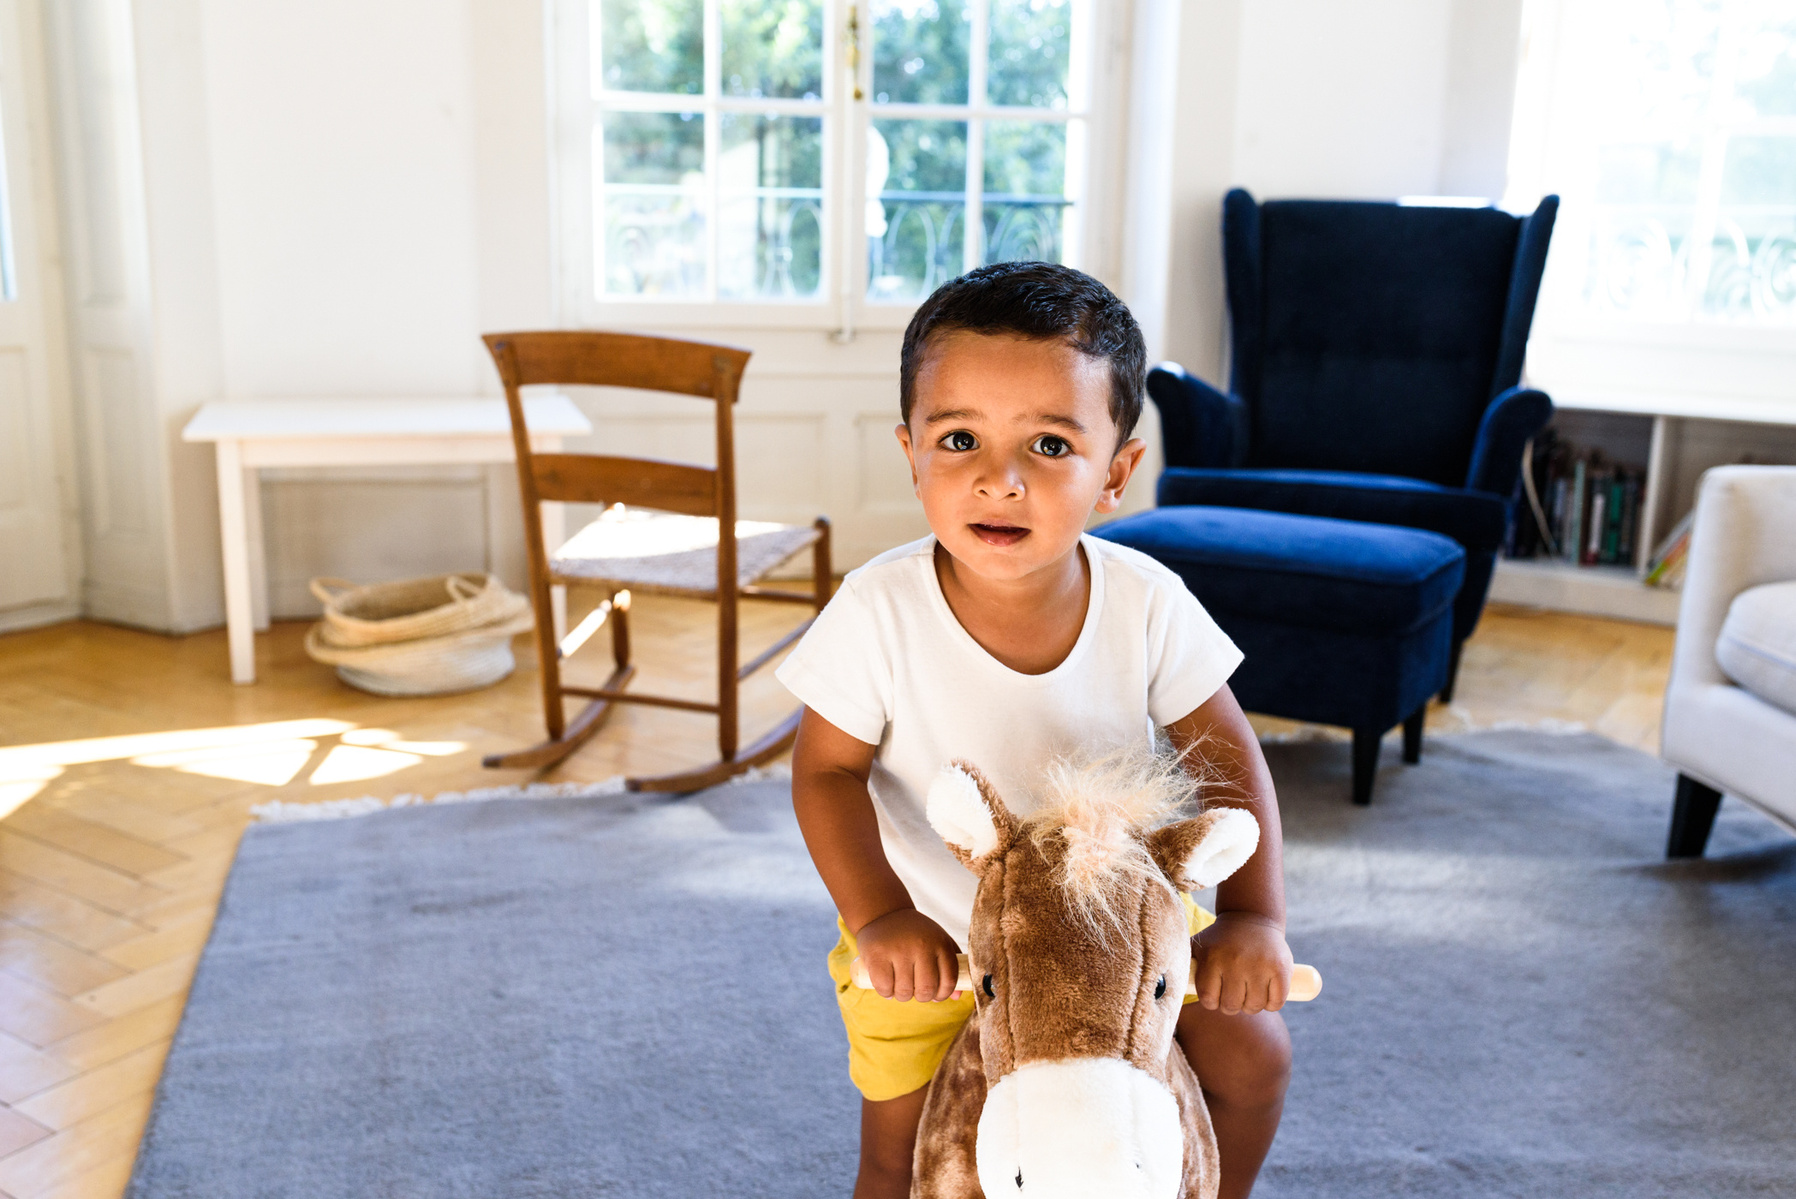 Lifestyle photography of a little boy playing on his rocking horse in his family's lounge with the sun streaming in. Shot in Geneva, Switzerland.